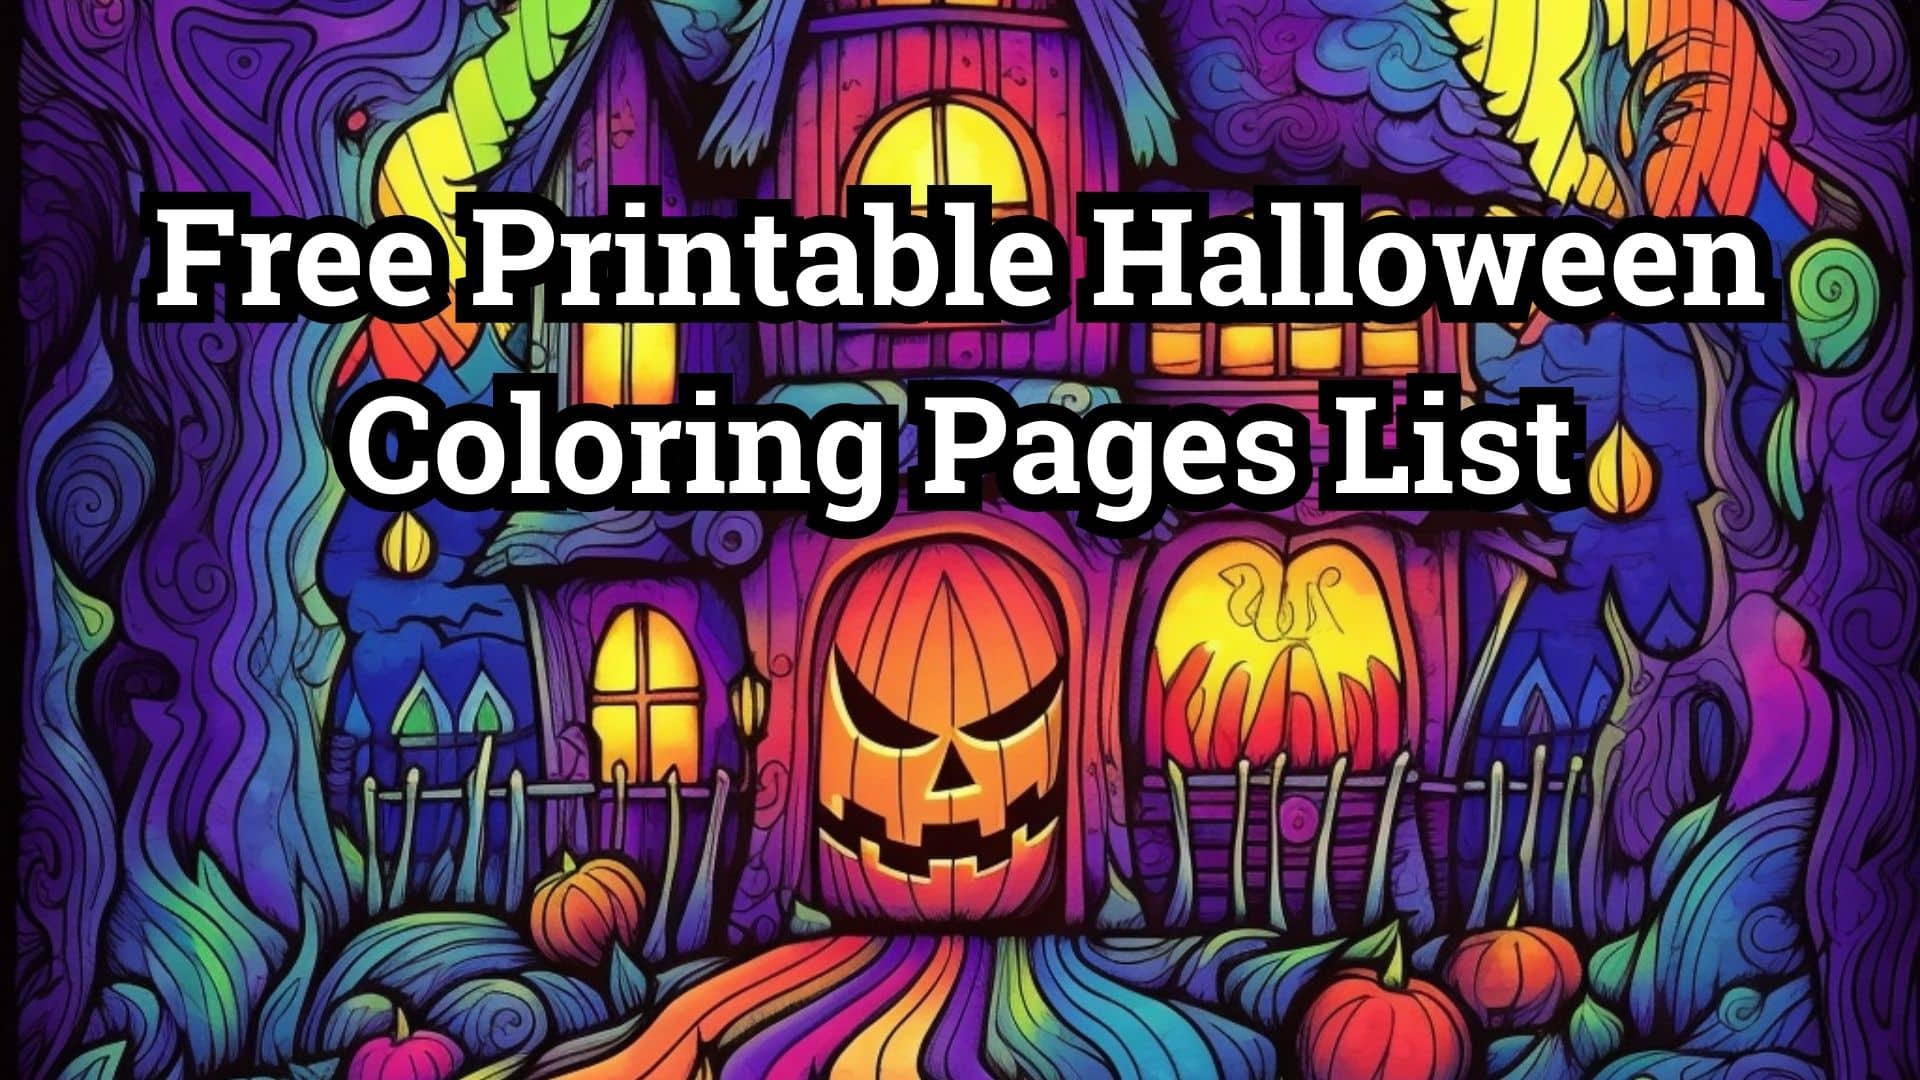 Free Printable Halloween Coloring Pages List